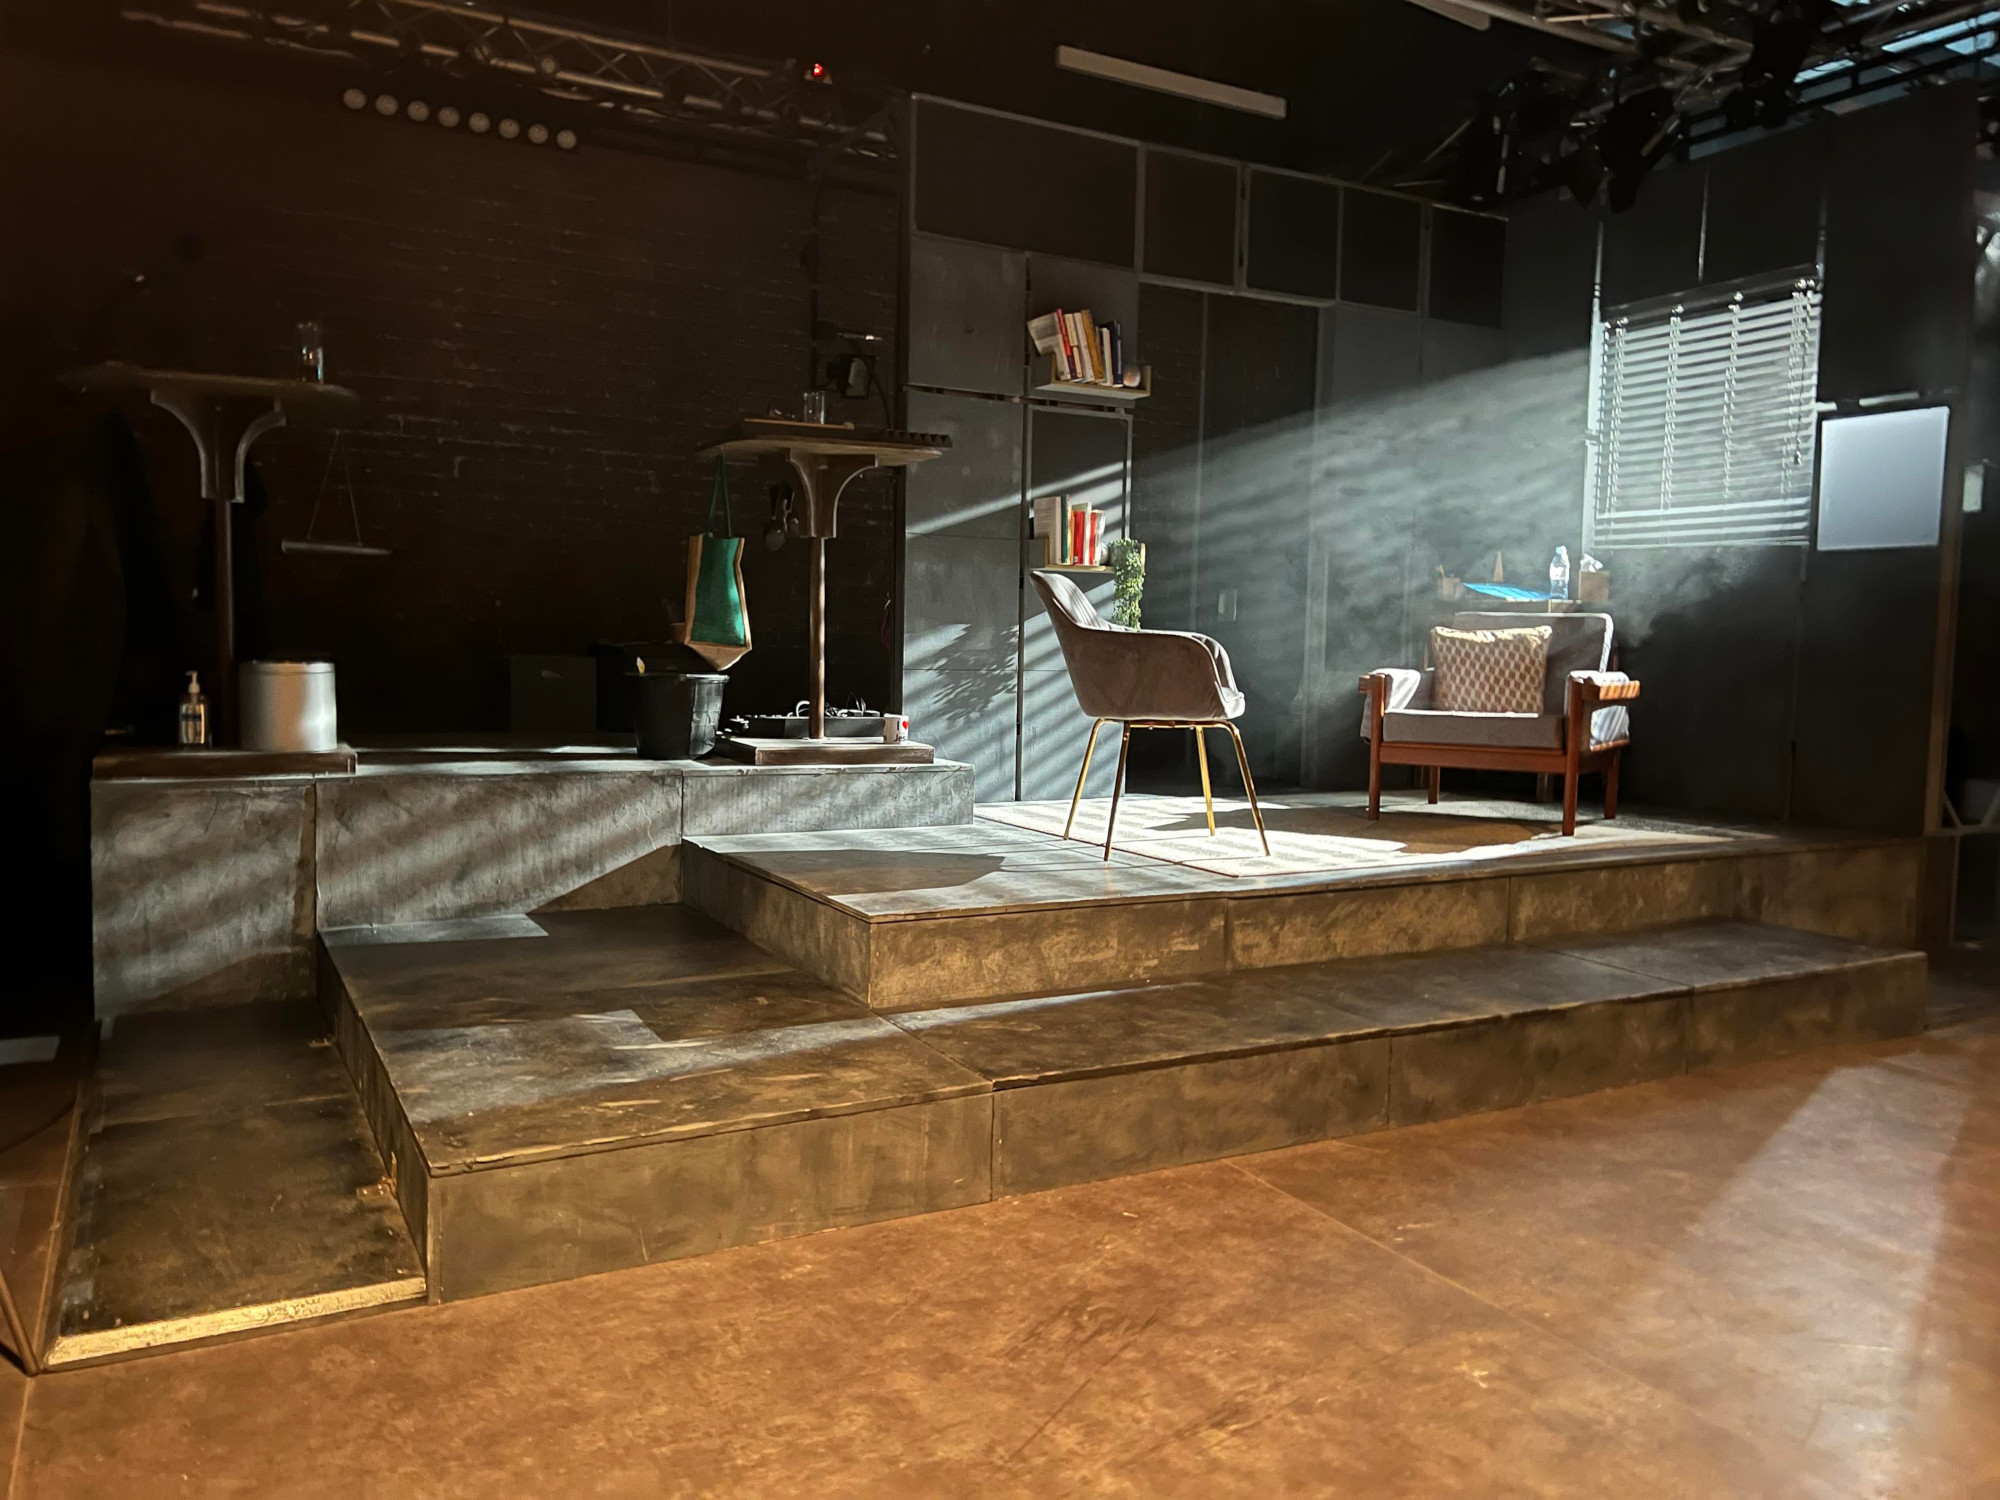 The Invisible Man set, lit with haze